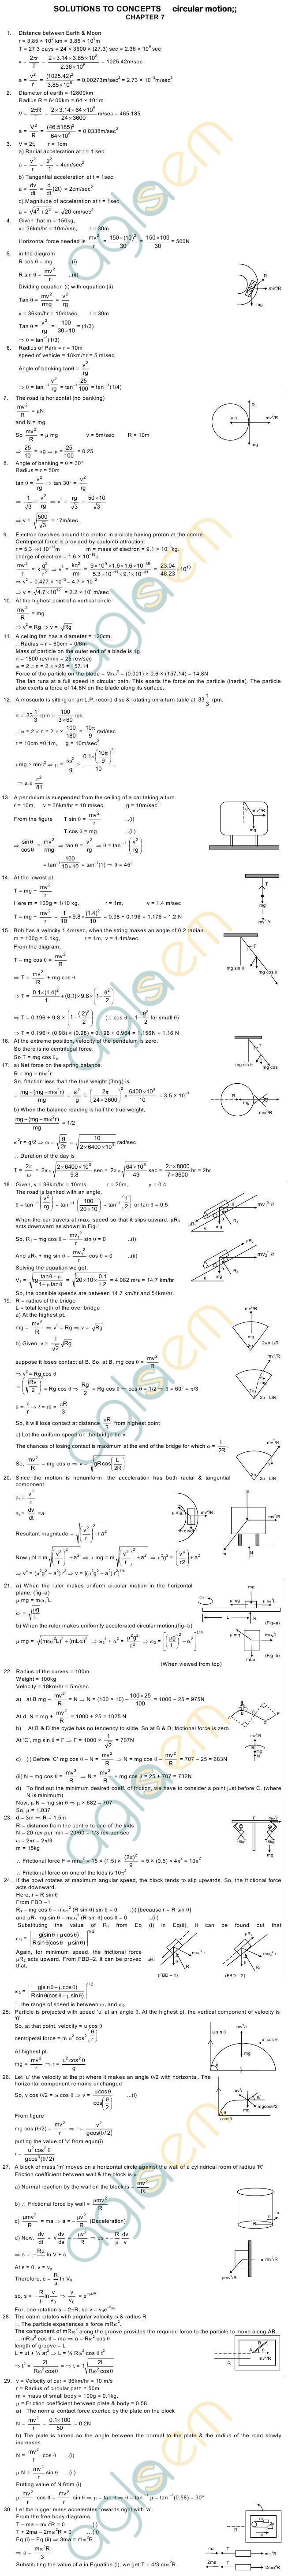 HC Verma Solutions: Chapter 7 - Circular Motion